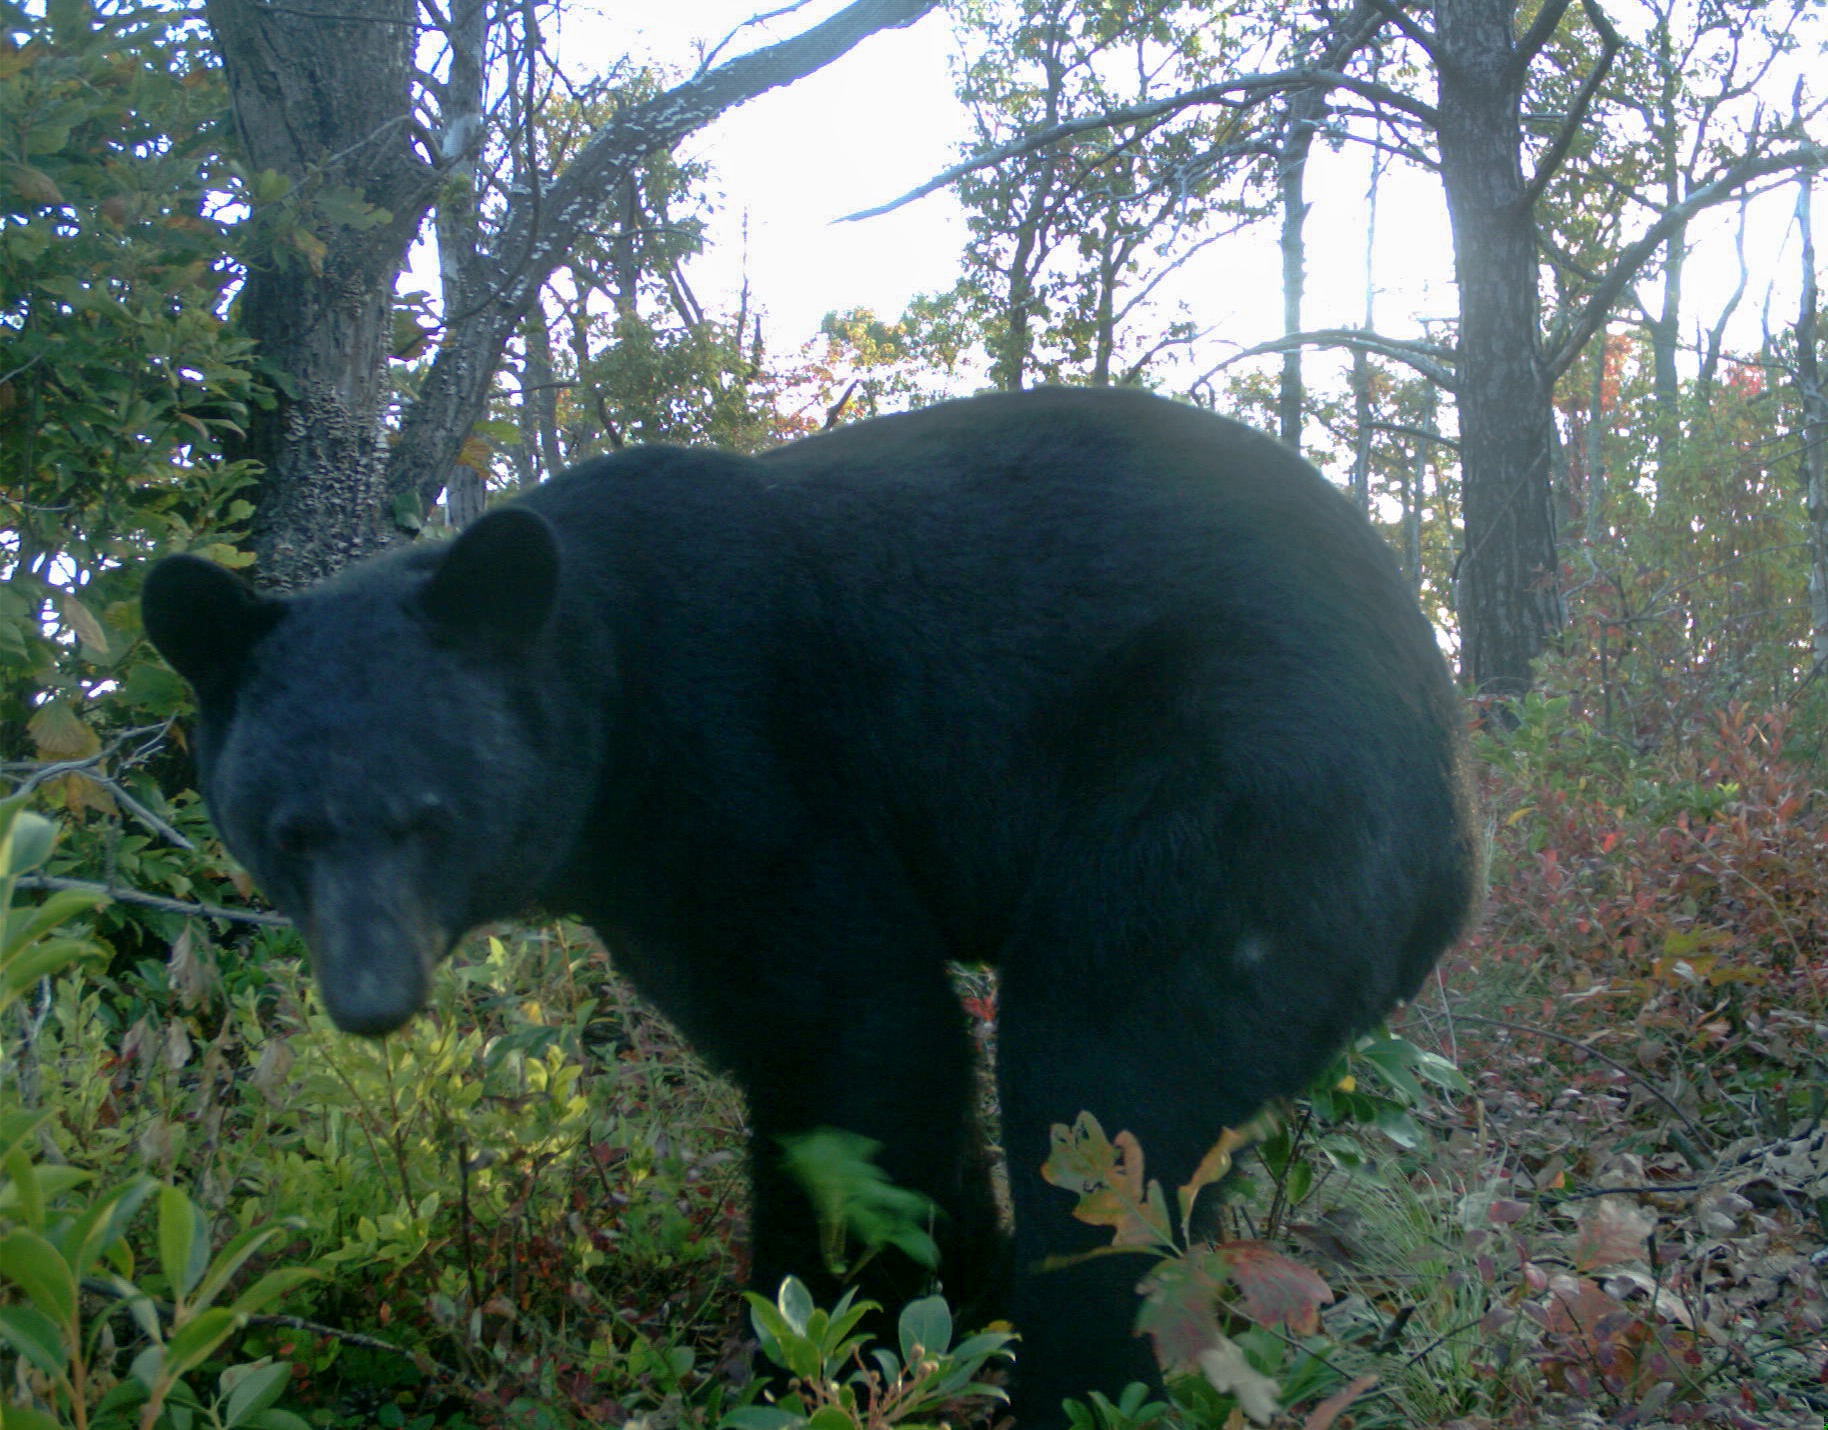 10 embarrassing animal photos captured by camera traps